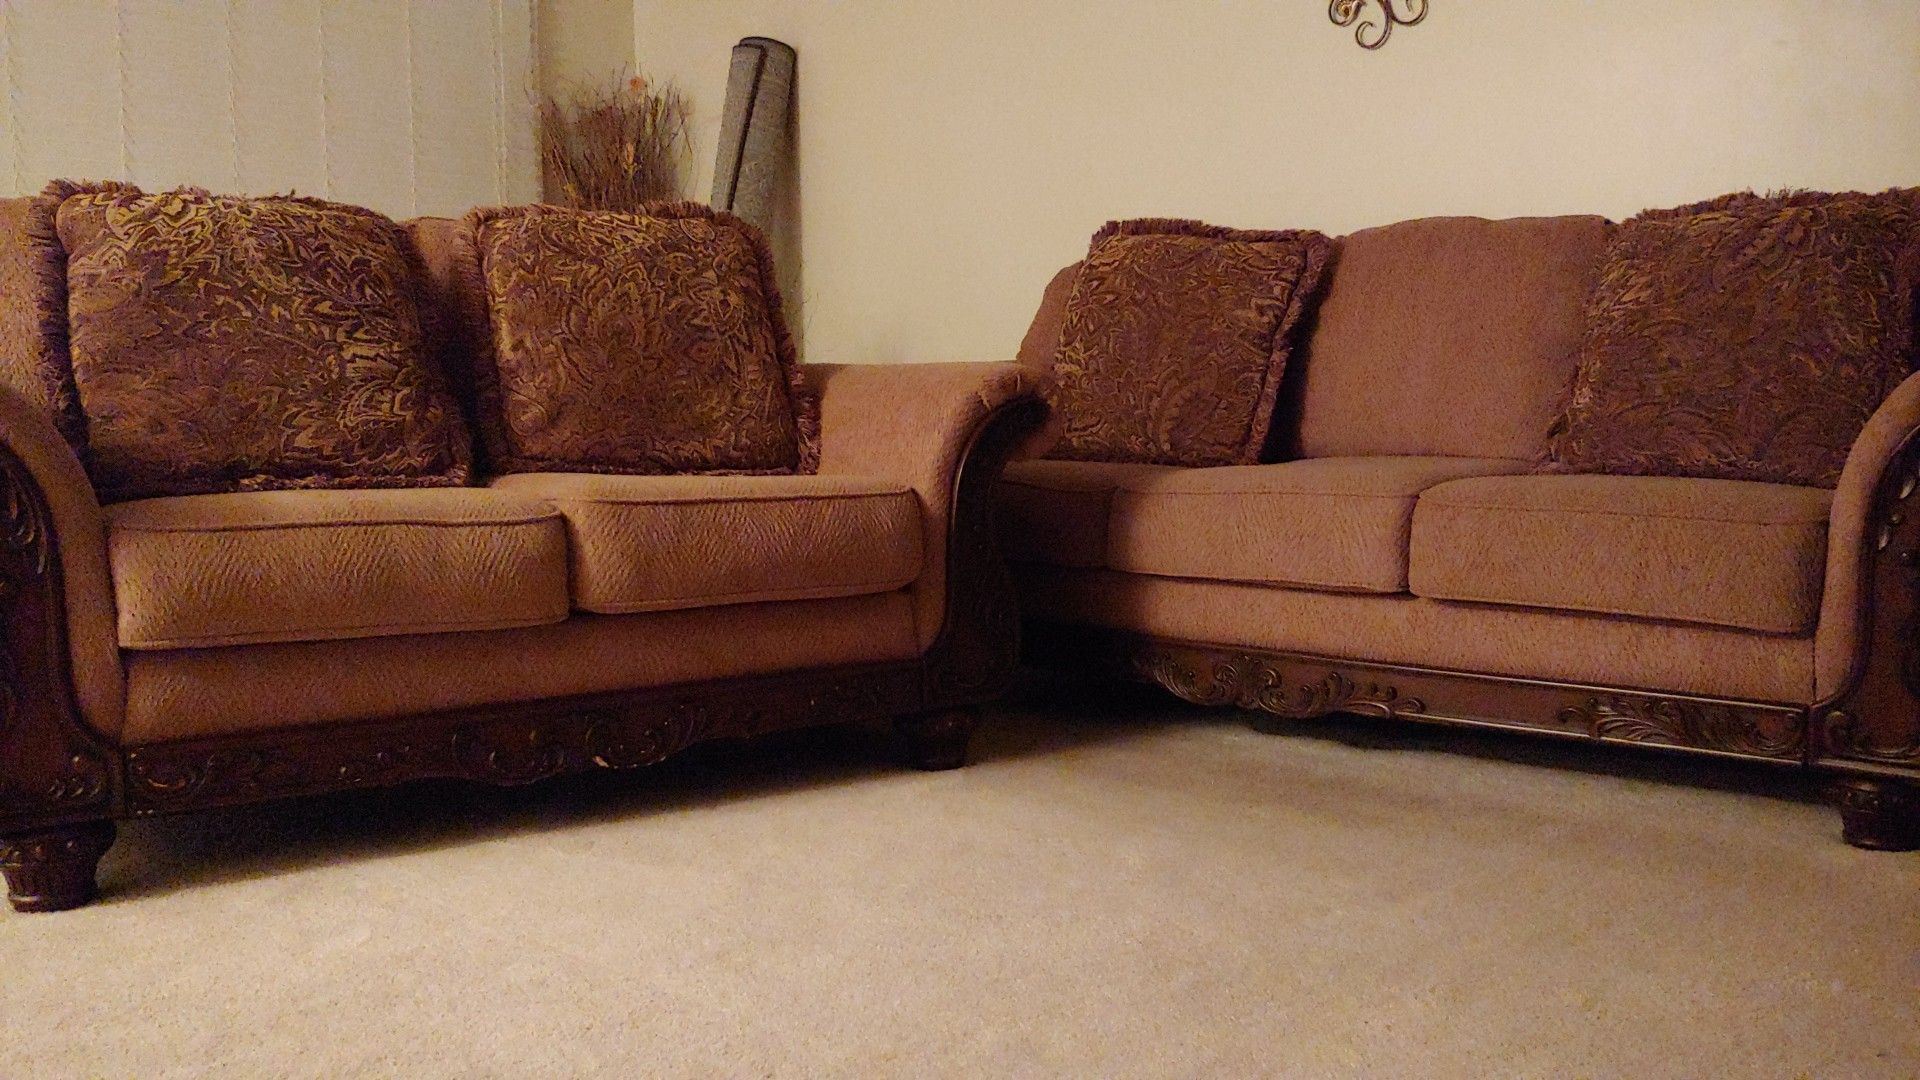 Sofa and Loveseat with wood trim and 4 pillows